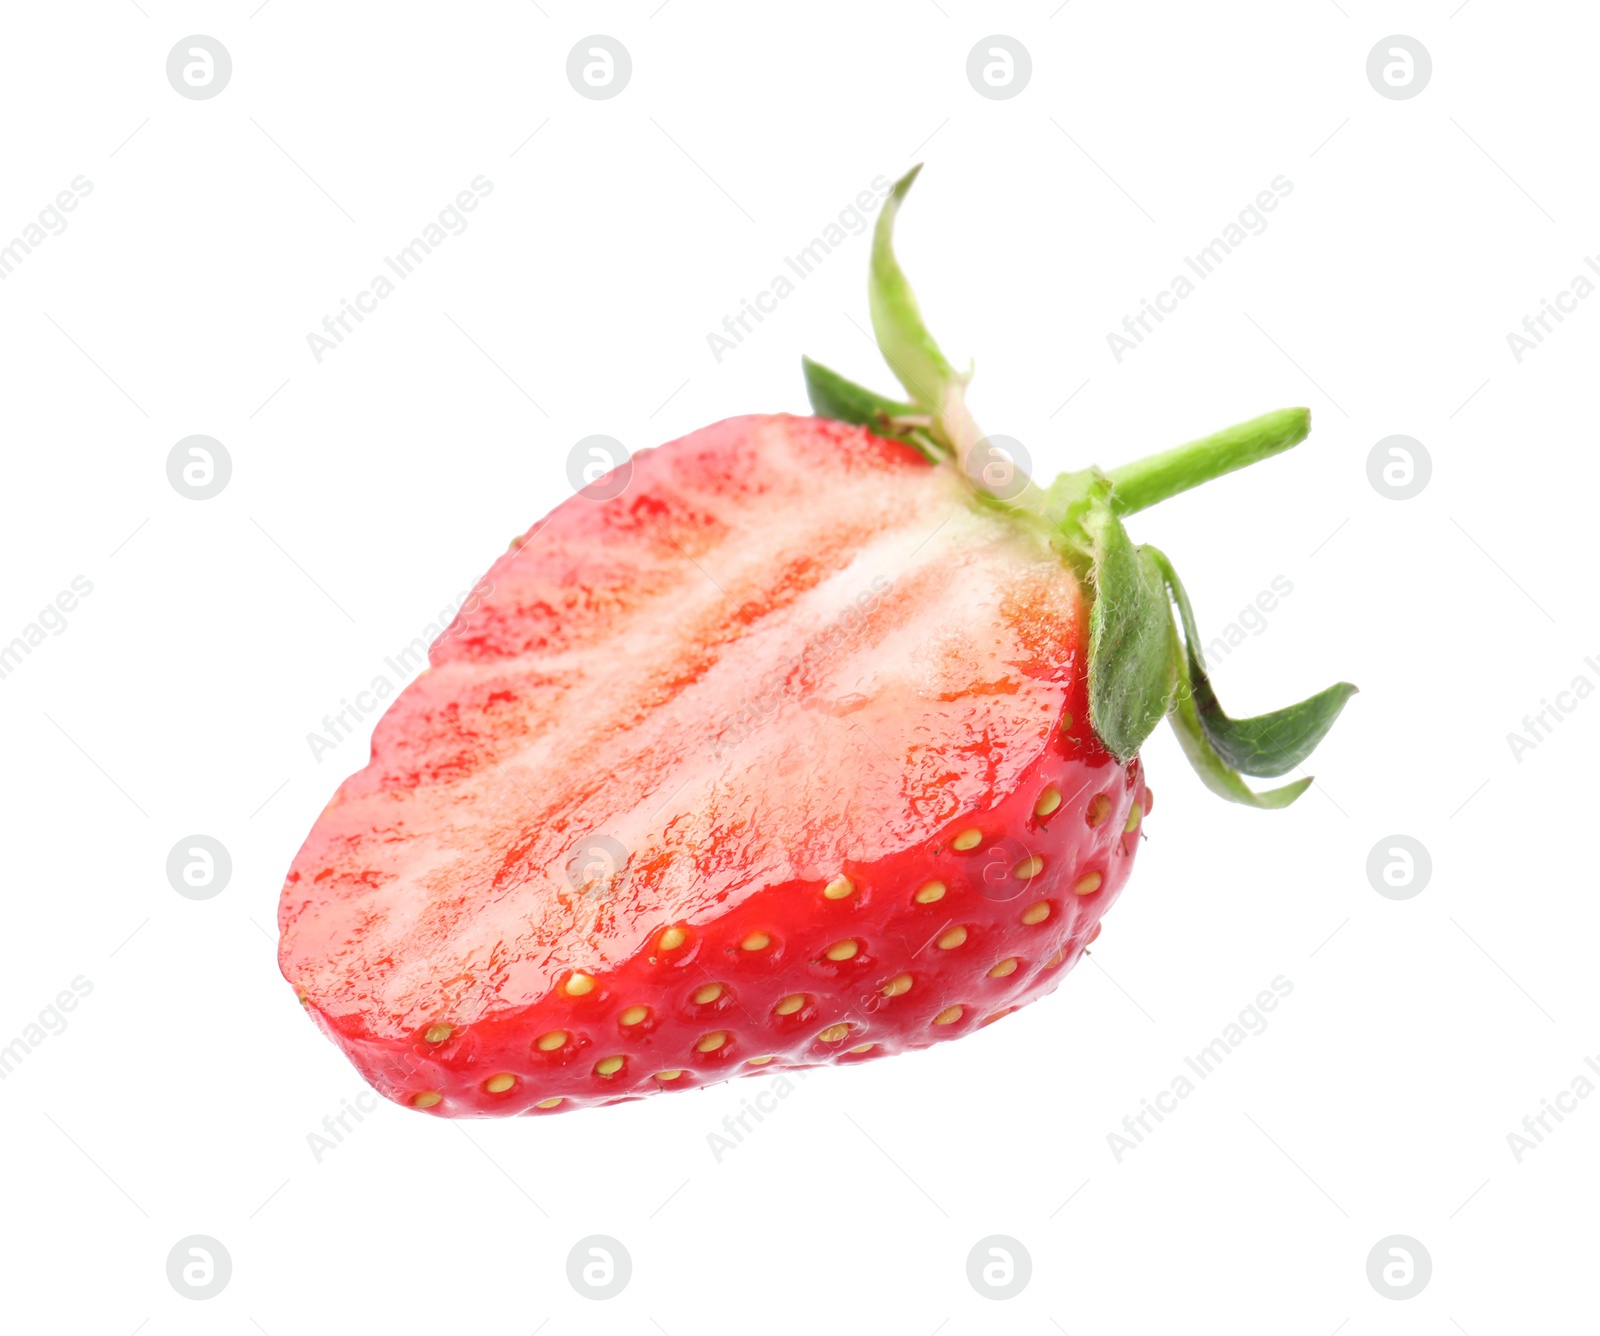 Photo of Half of ripe strawberry isolated on white